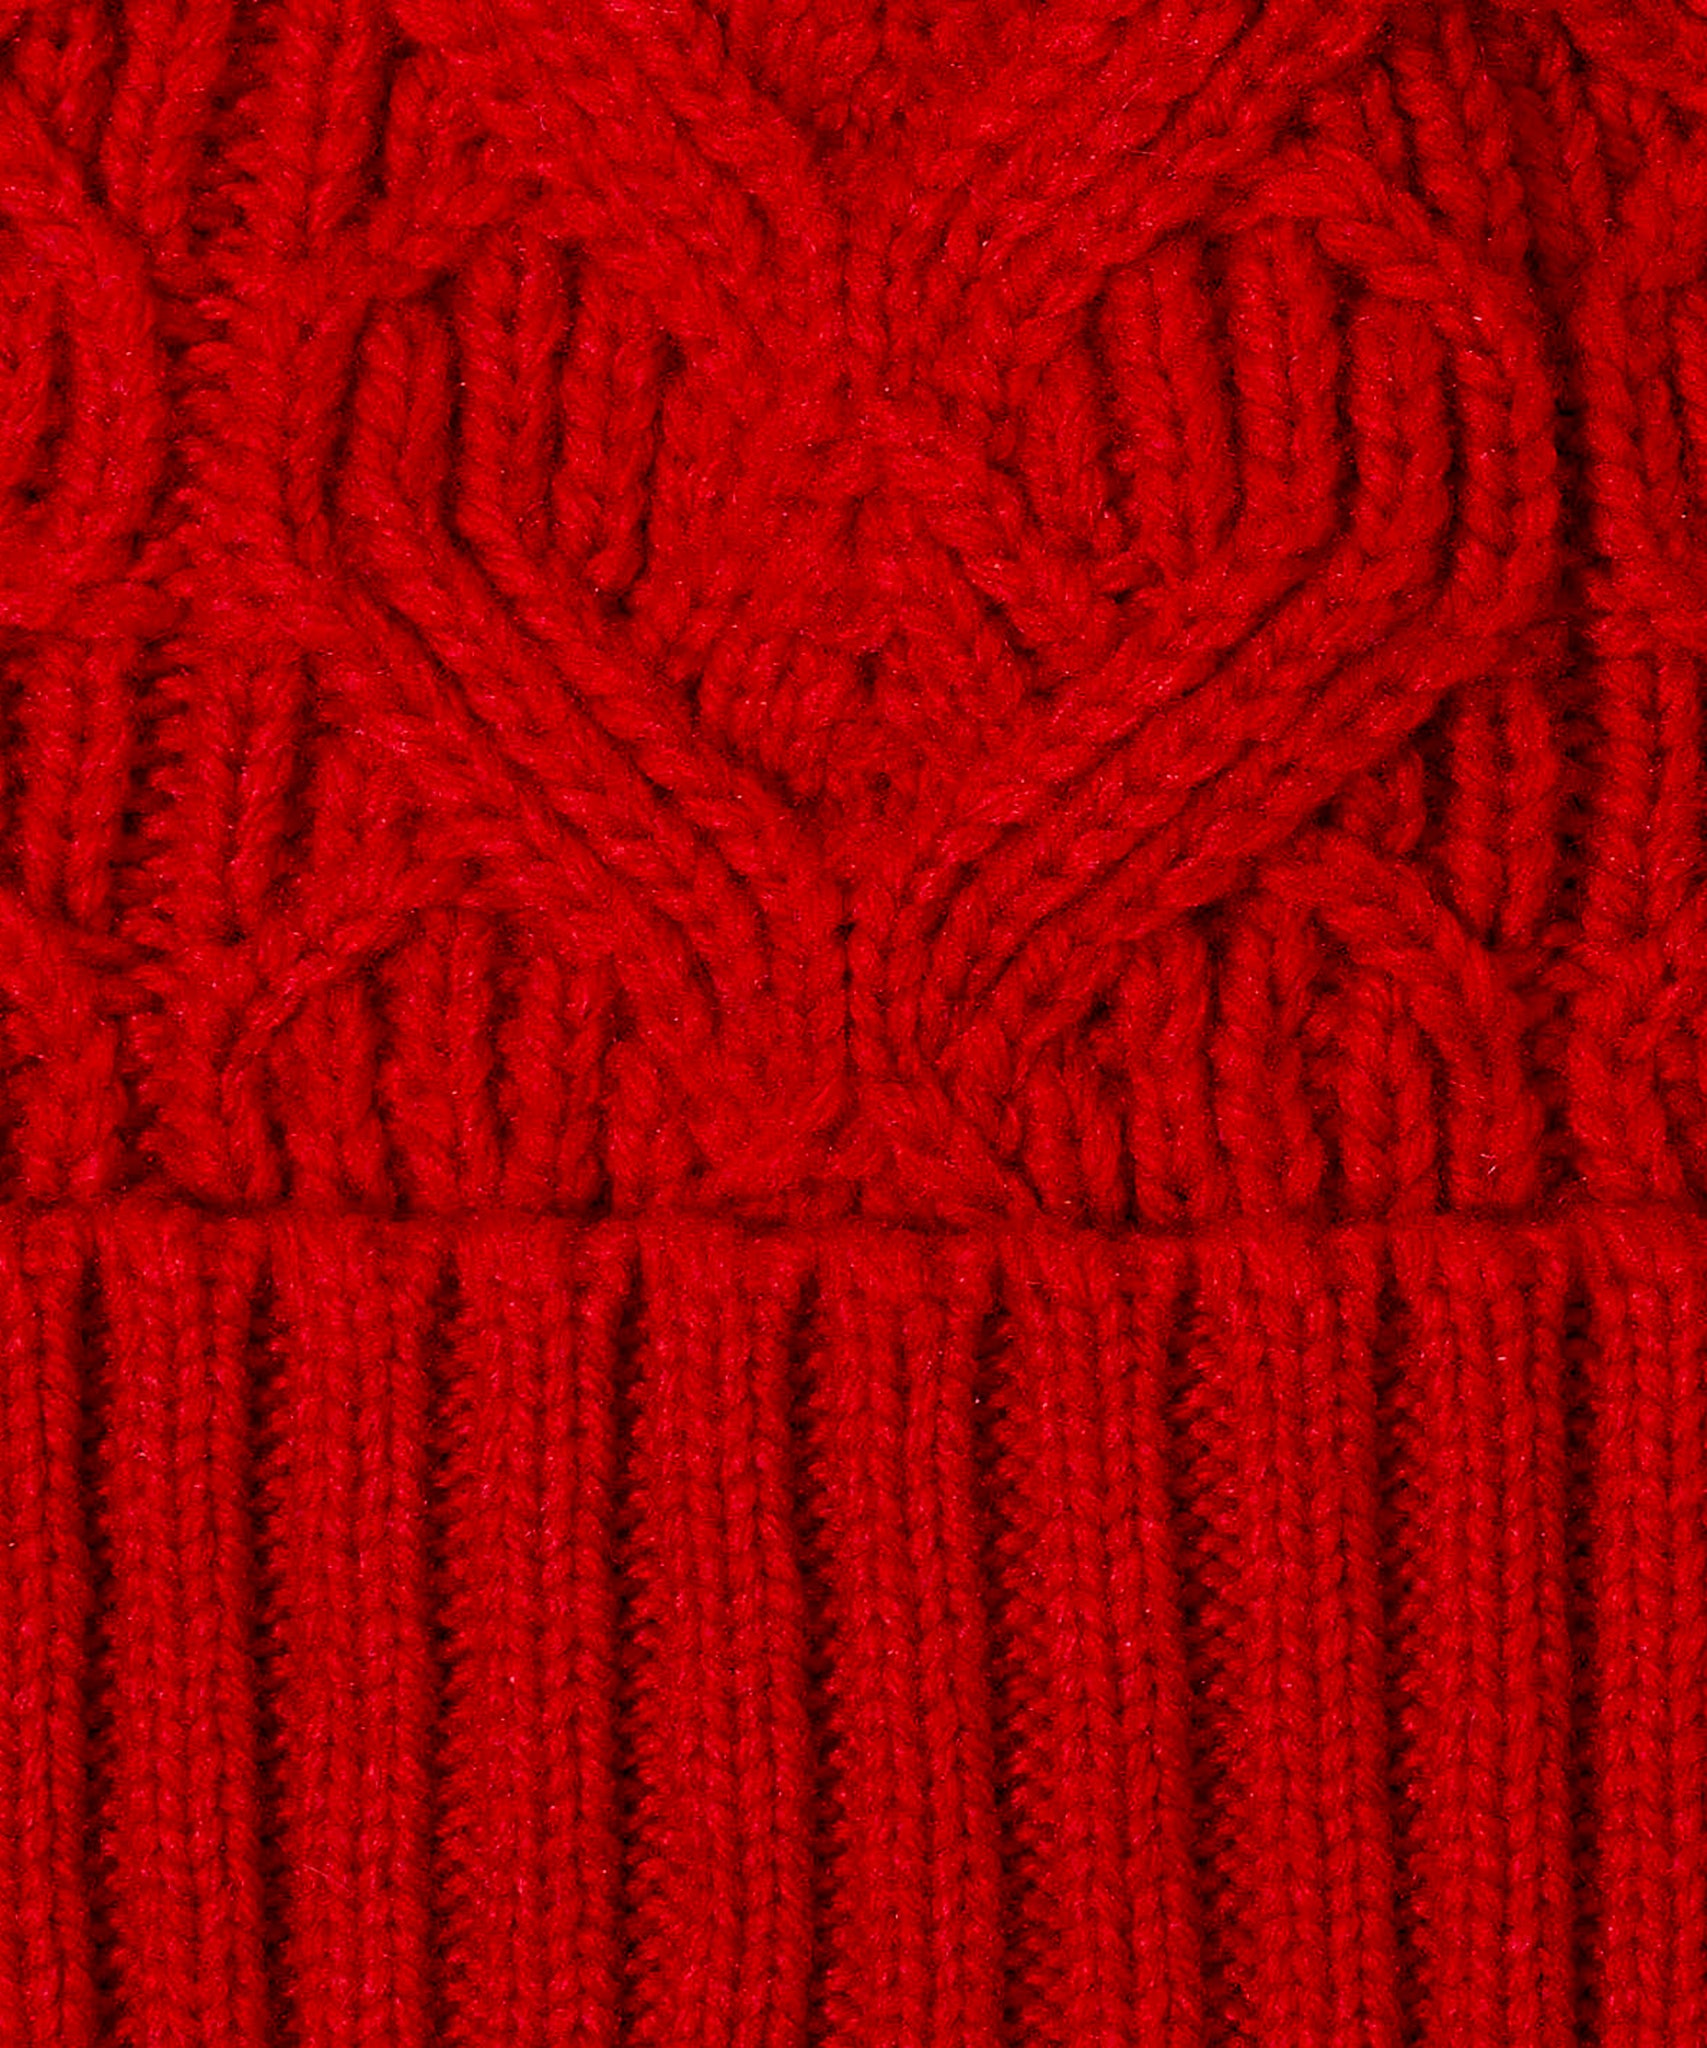 Loopy Cable Pom Hat in color Ruby Red